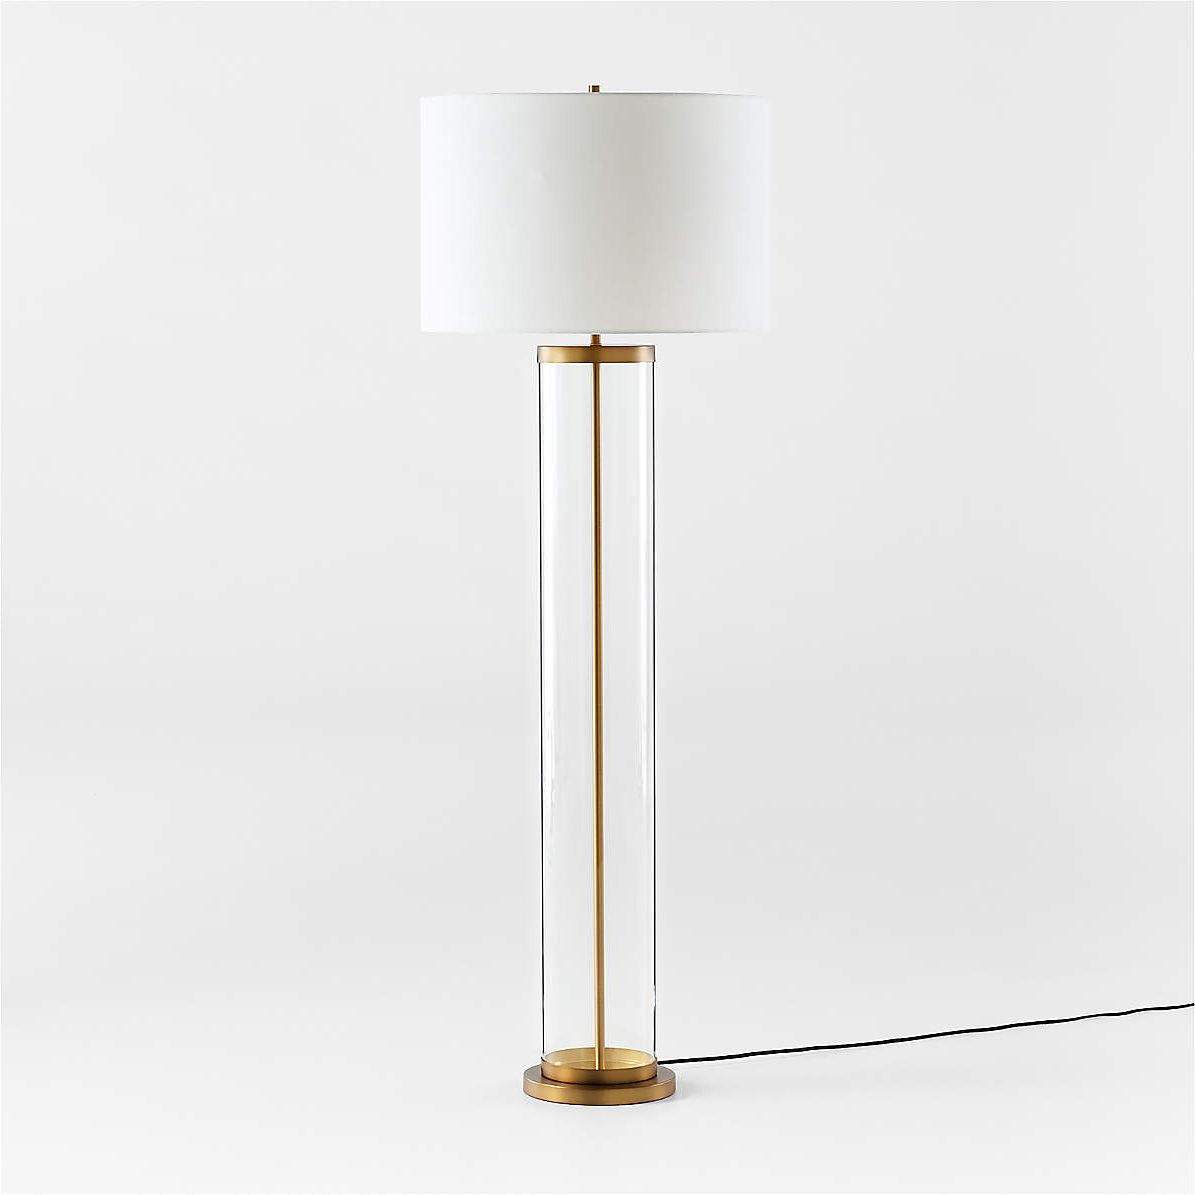 Promenade Avenue Black And Brass Floor Lamp With White Shade + Reviews |  Crate & Barrel In White Shade Floor Lamps (View 2 of 20)